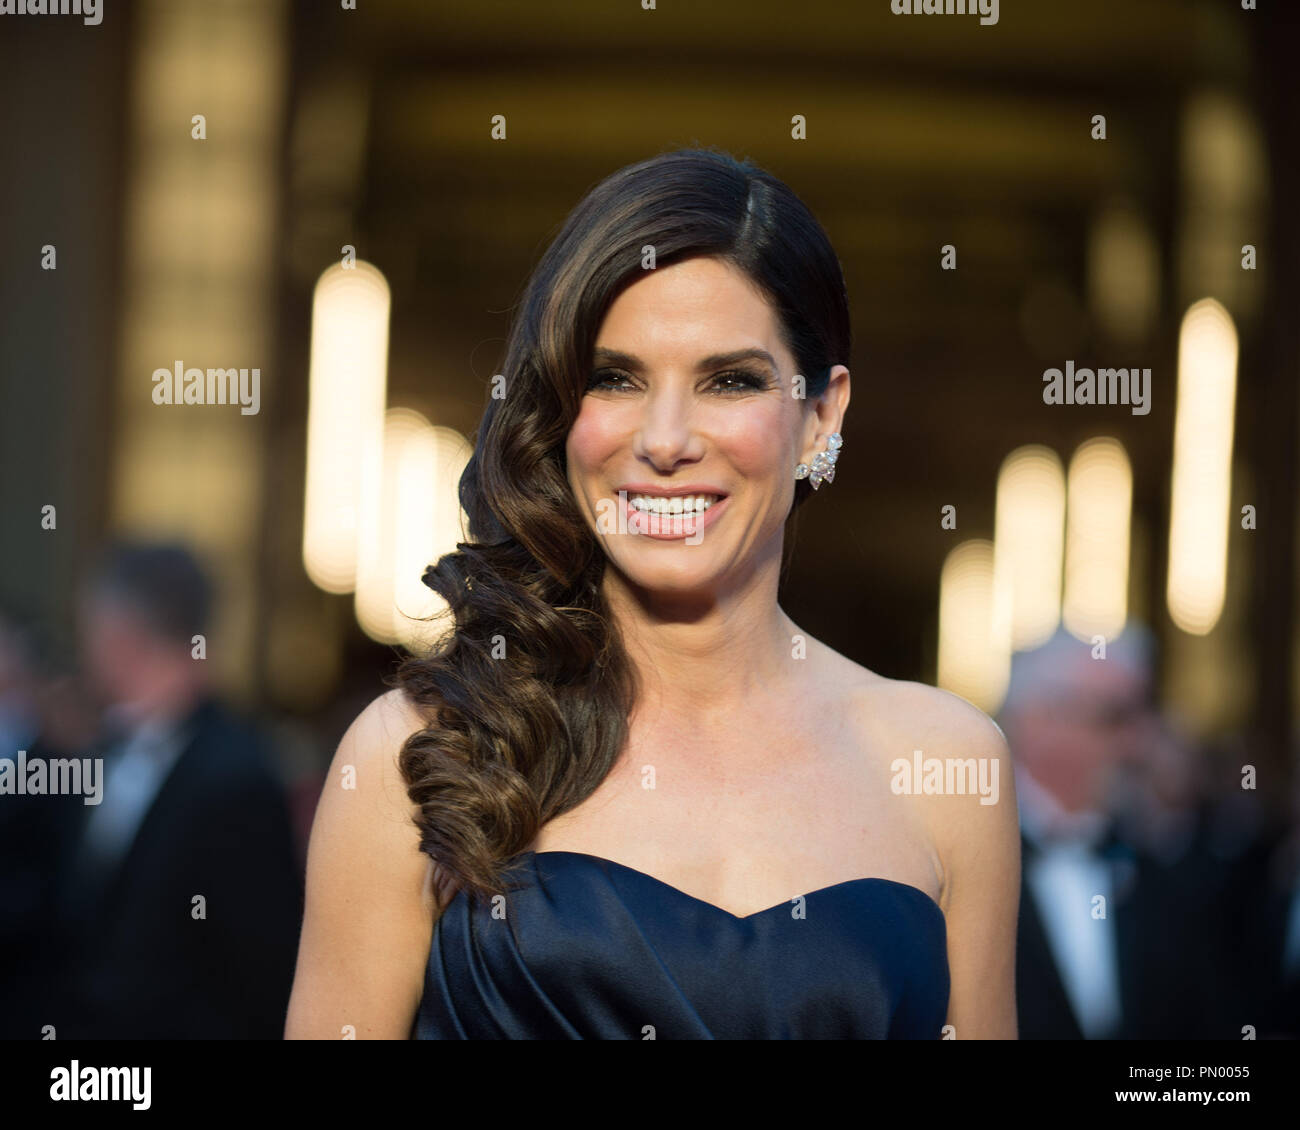 https://c8.alamy.com/comp/PN0055/oscar-nominated-actress-sandra-bullock-arrives-for-the-live-abc-telecast-of-the-86th-oscars-at-the-dolby-theatre-on-march-2-2014-in-hollywood-ca-file-reference-32268-791-for-editorial-use-only-all-rights-reserved-PN0055.jpg